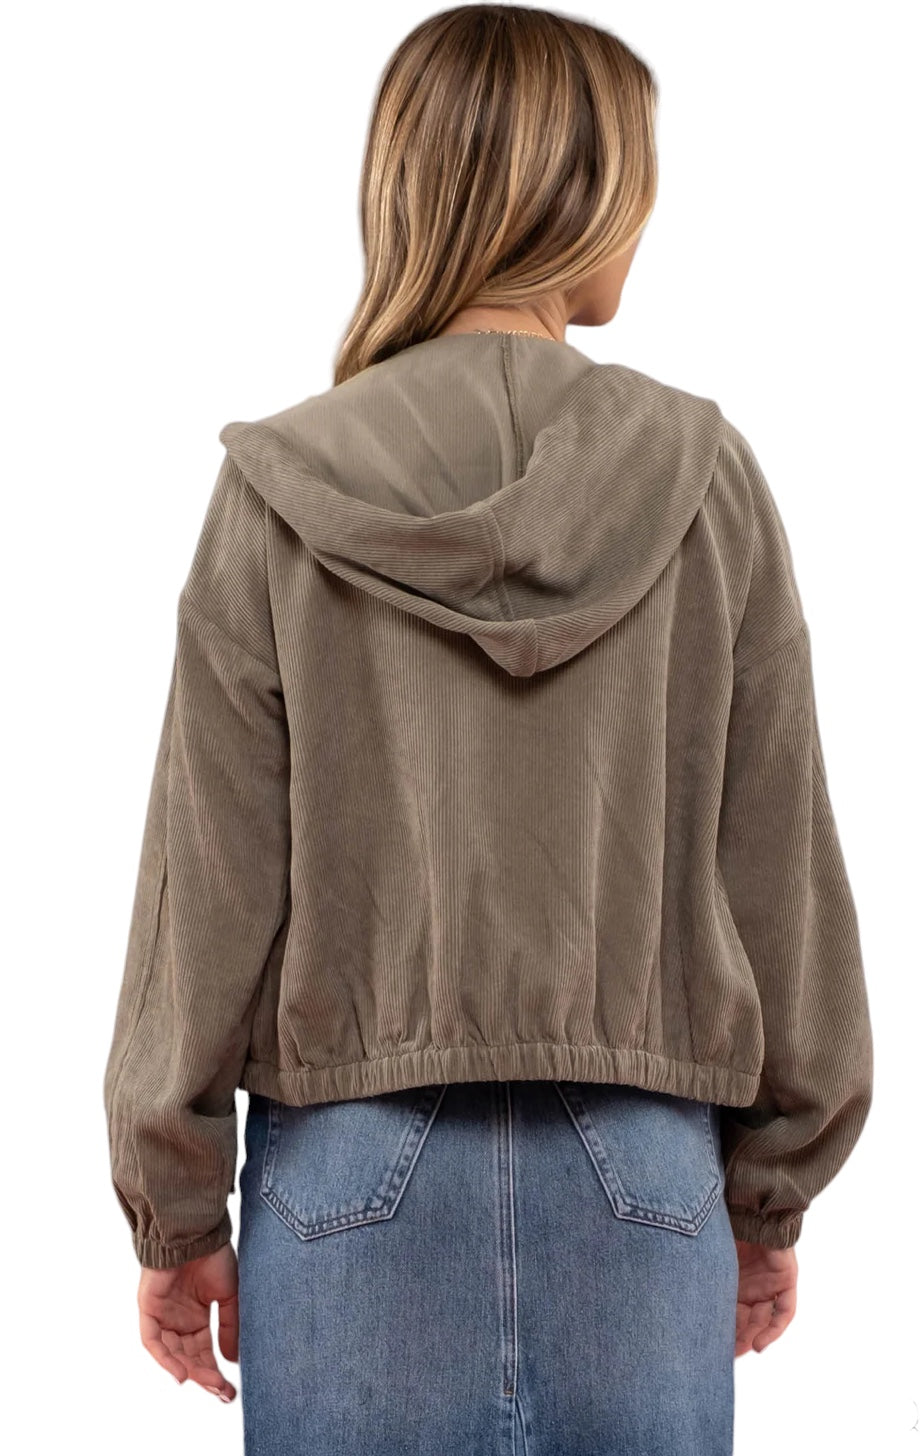 The Kyleigh Corduroy Jacket (2 colors) (S-L)